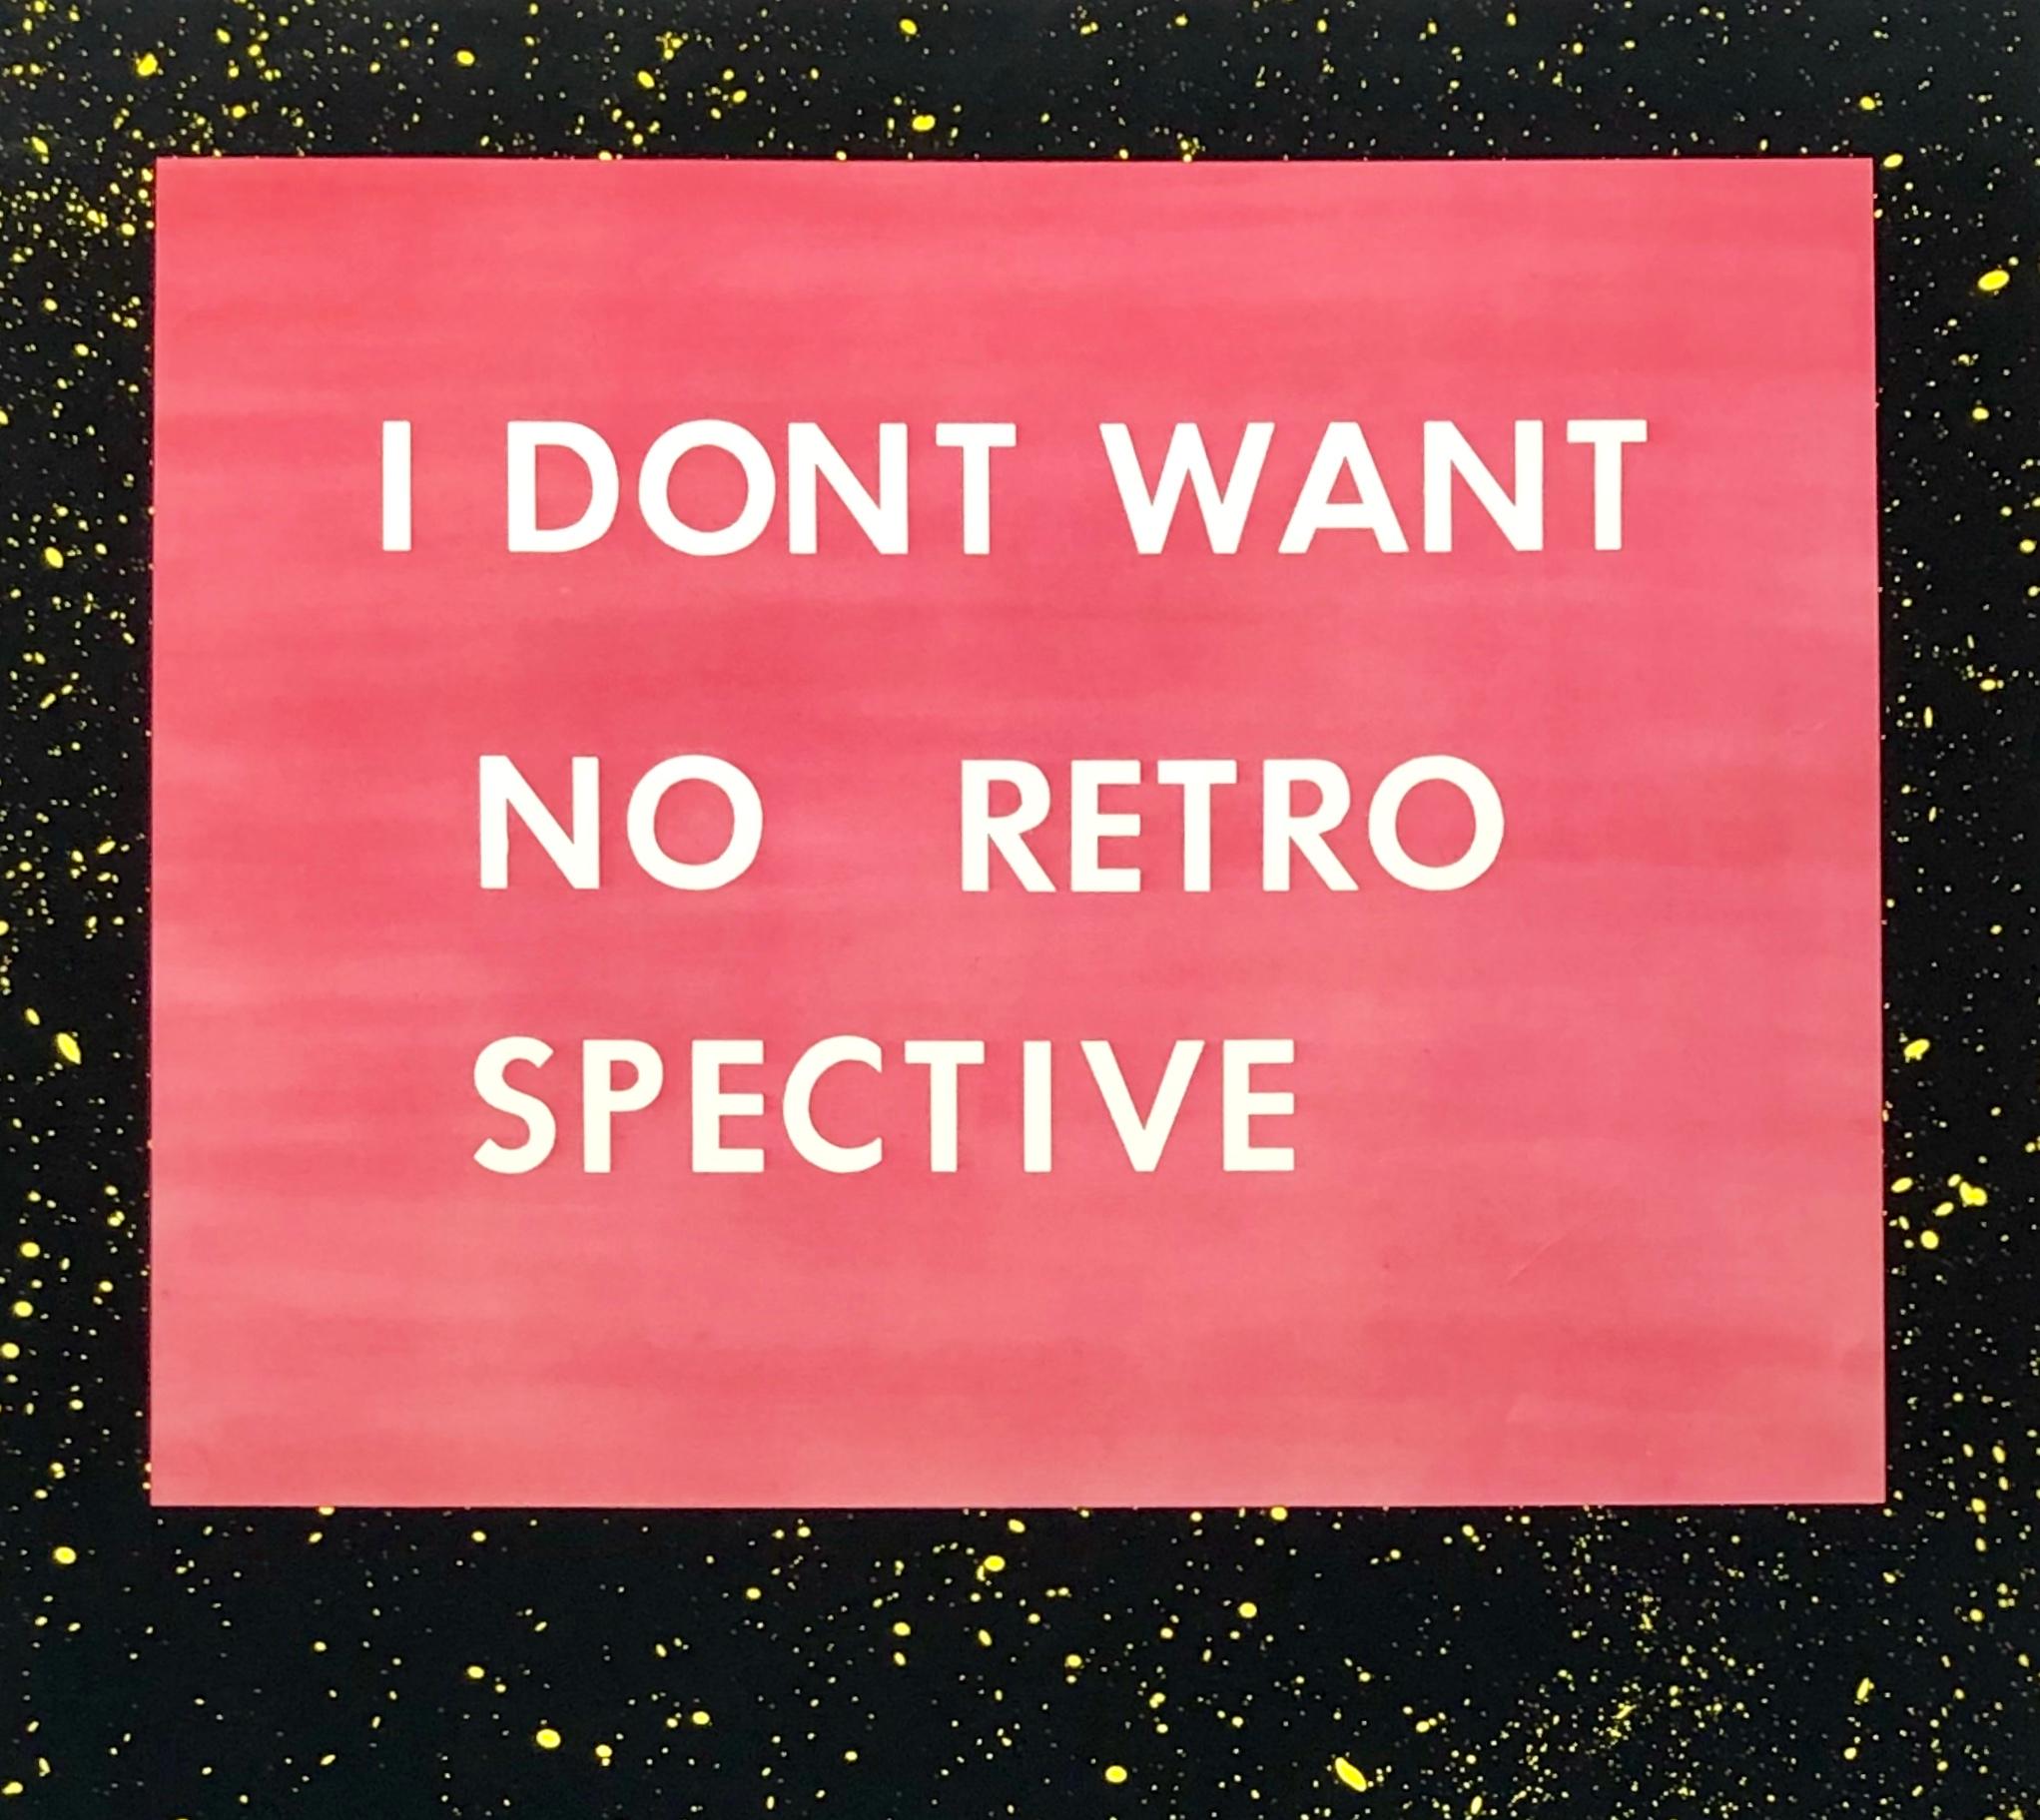 Ed Ruscha Whiney Museum poster 1982 (Ed Ruscha I Don't Want No Retro Spective) - Print by (After) Ed Ruscha